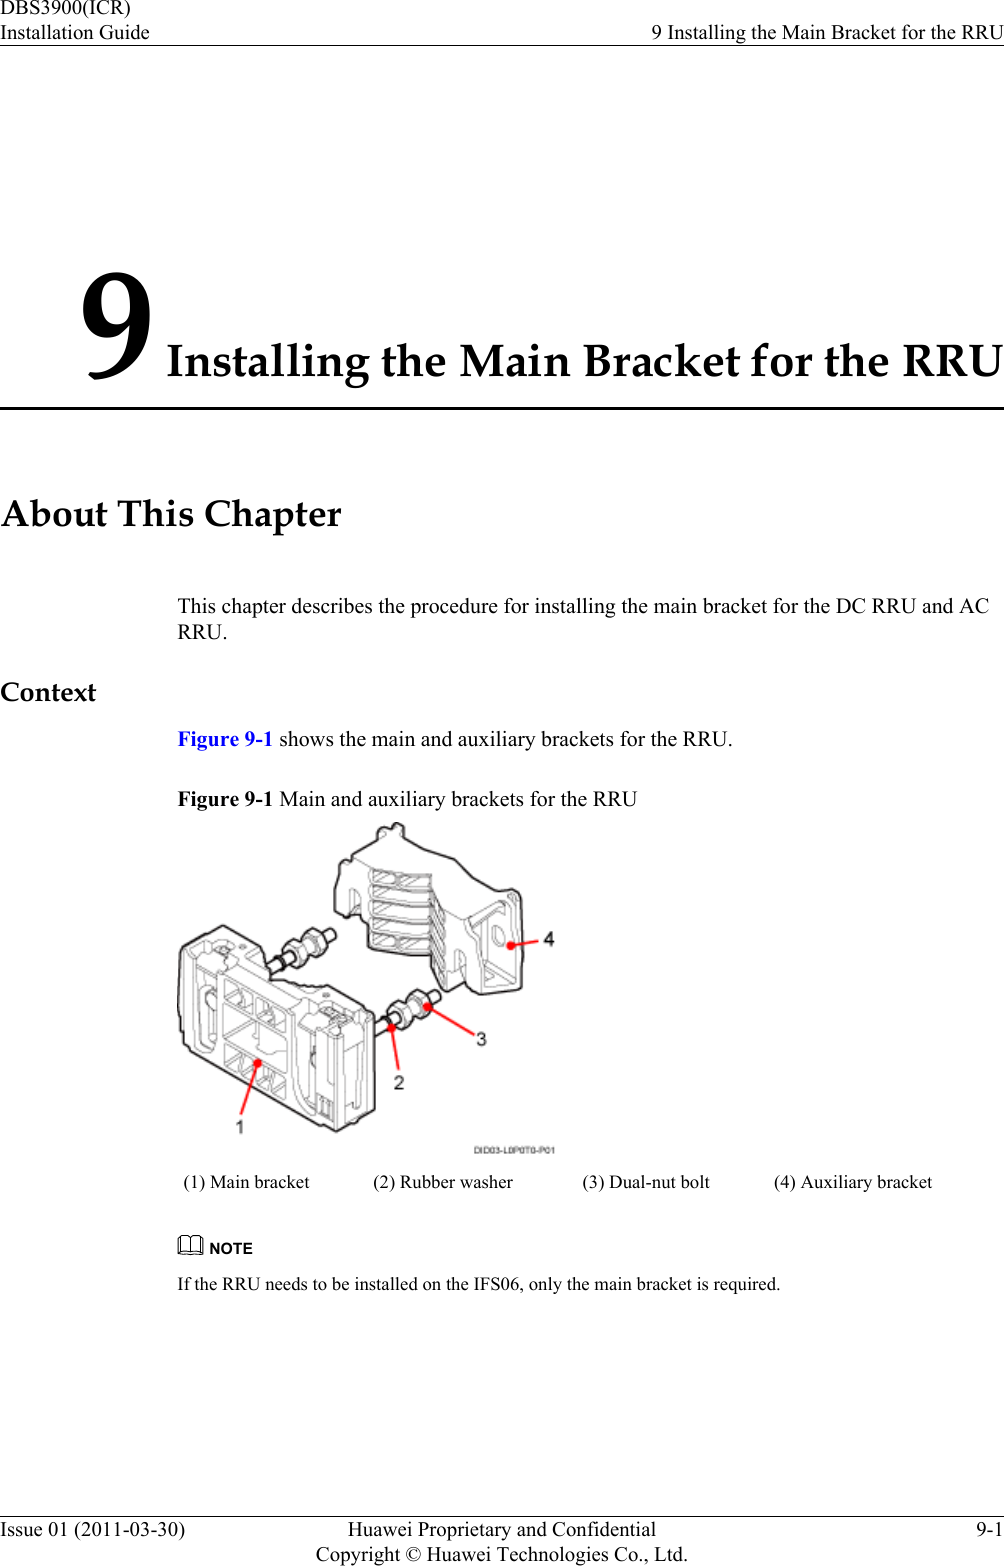 9 Installing the Main Bracket for the RRUAbout This ChapterThis chapter describes the procedure for installing the main bracket for the DC RRU and ACRRU.ContextFigure 9-1 shows the main and auxiliary brackets for the RRU.Figure 9-1 Main and auxiliary brackets for the RRU(1) Main bracket (2) Rubber washer (3) Dual-nut bolt (4) Auxiliary bracketNOTEIf the RRU needs to be installed on the IFS06, only the main bracket is required.DBS3900(ICR)Installation Guide 9 Installing the Main Bracket for the RRUIssue 01 (2011-03-30) Huawei Proprietary and ConfidentialCopyright © Huawei Technologies Co., Ltd.9-1